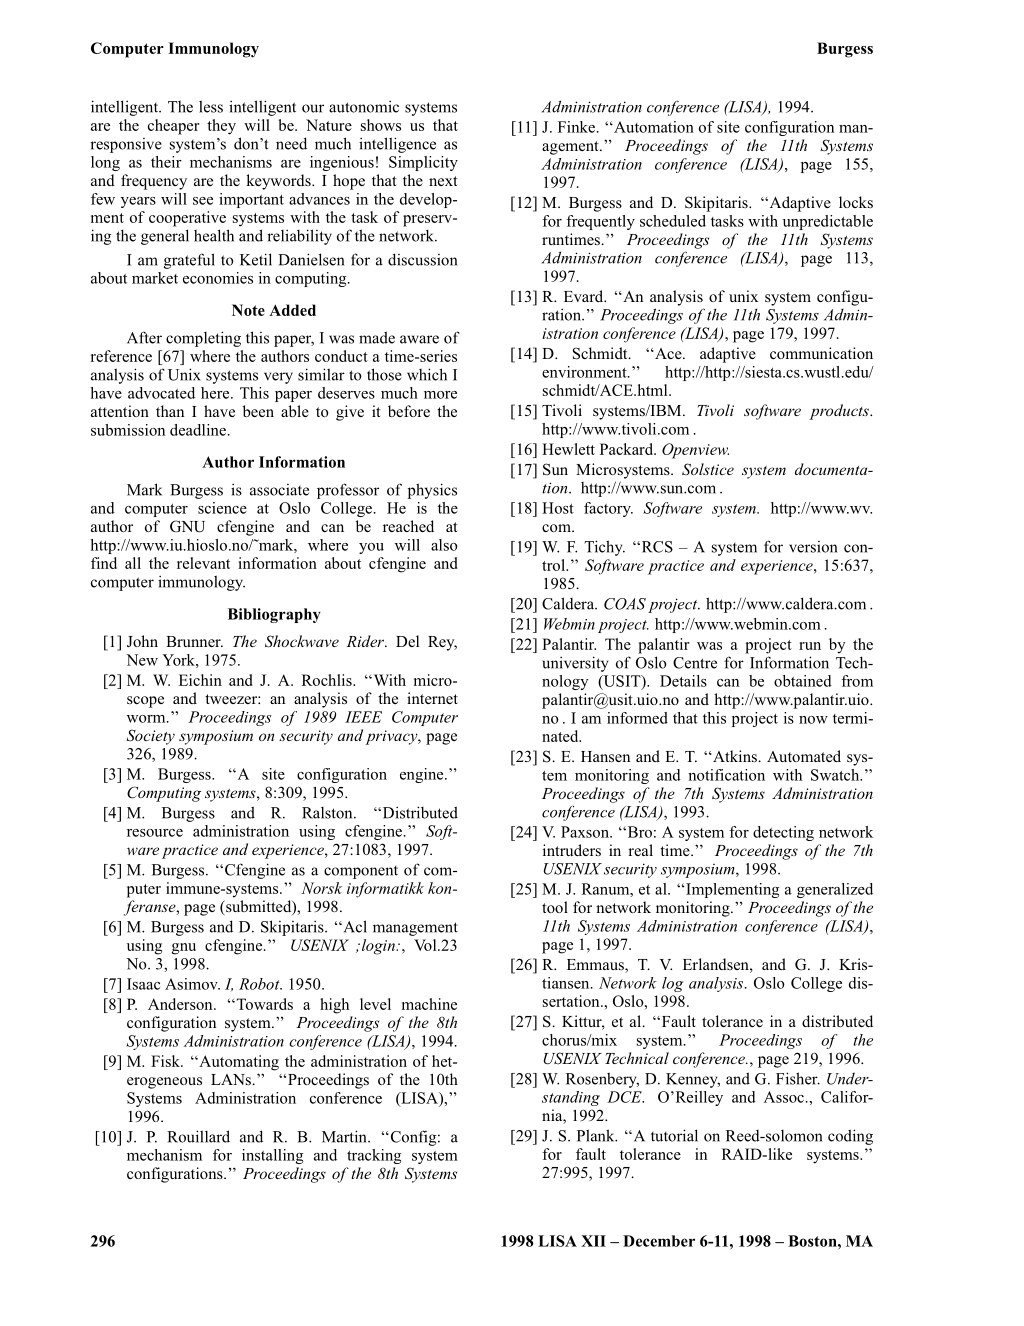 page 15